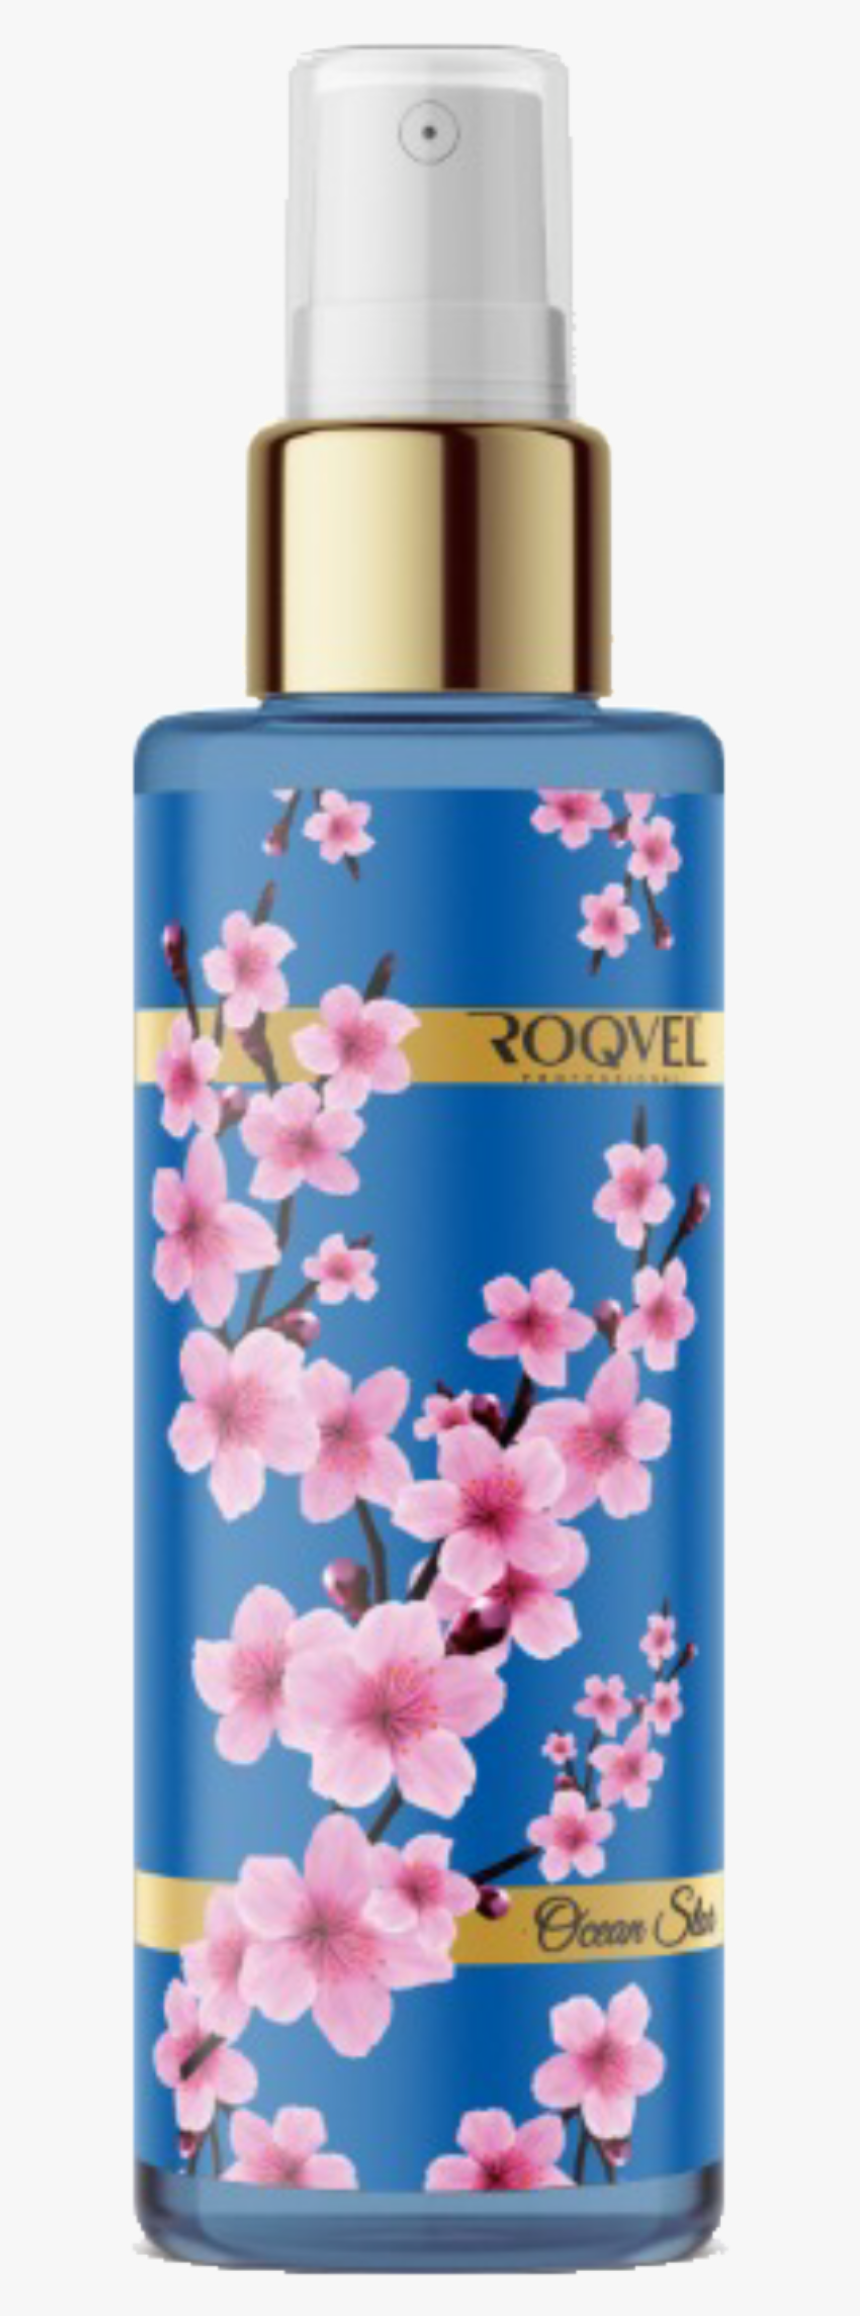 Roqvel Body Splash Flowers Collection - Camomile